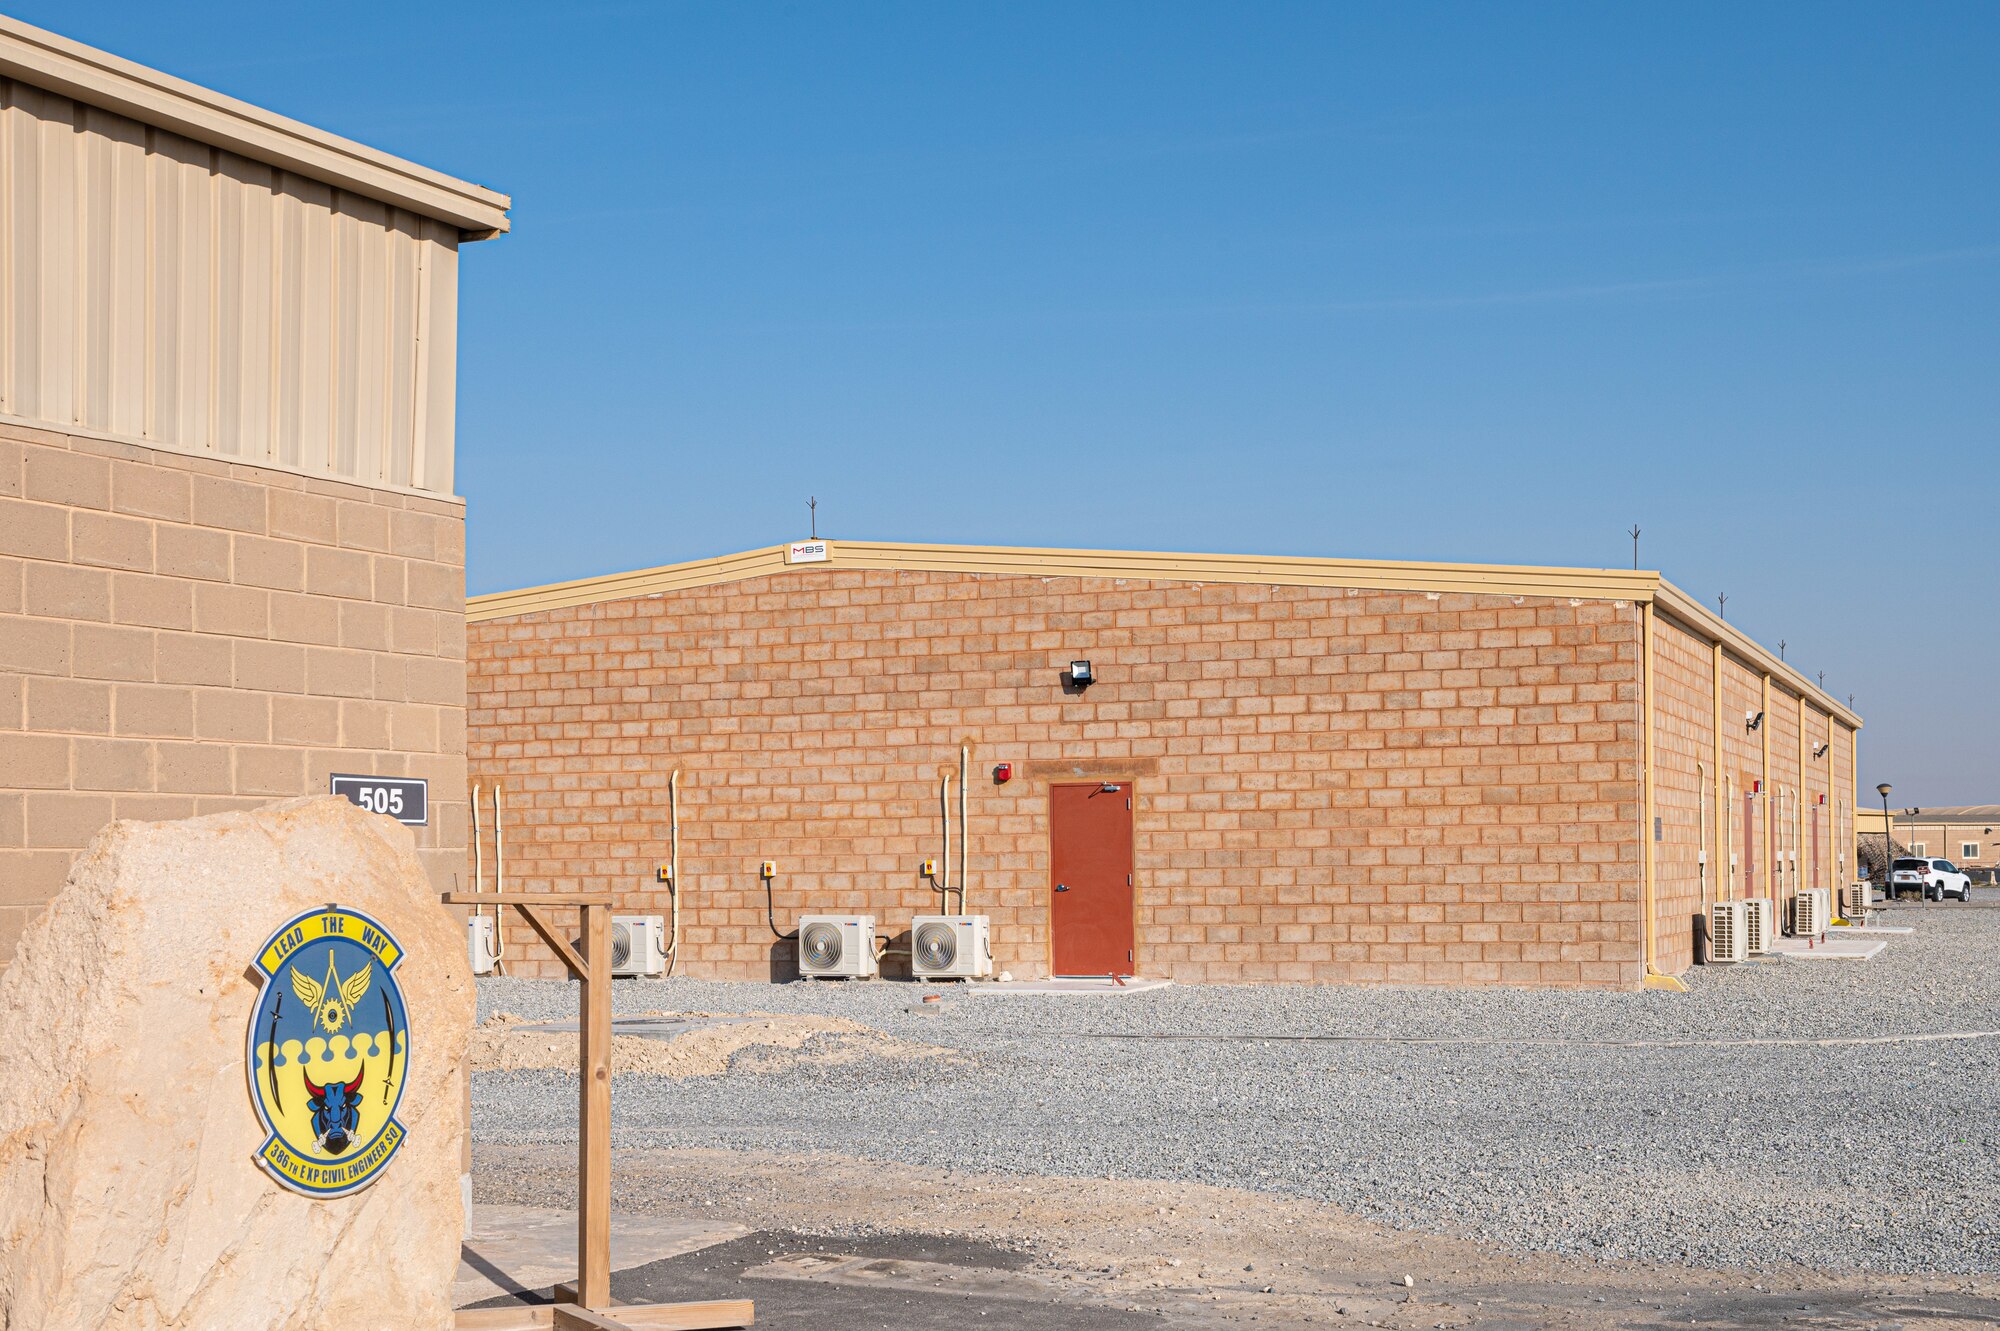 A new building was completed at Ali Al Salem Air Base recently. This one is a bit different from the rest that stand around it, with its red tinted brick that stretches to its roof. Using local building practices as well as material, this building is a first of its kind which might lead to a new engineering mindset for the future of the base.